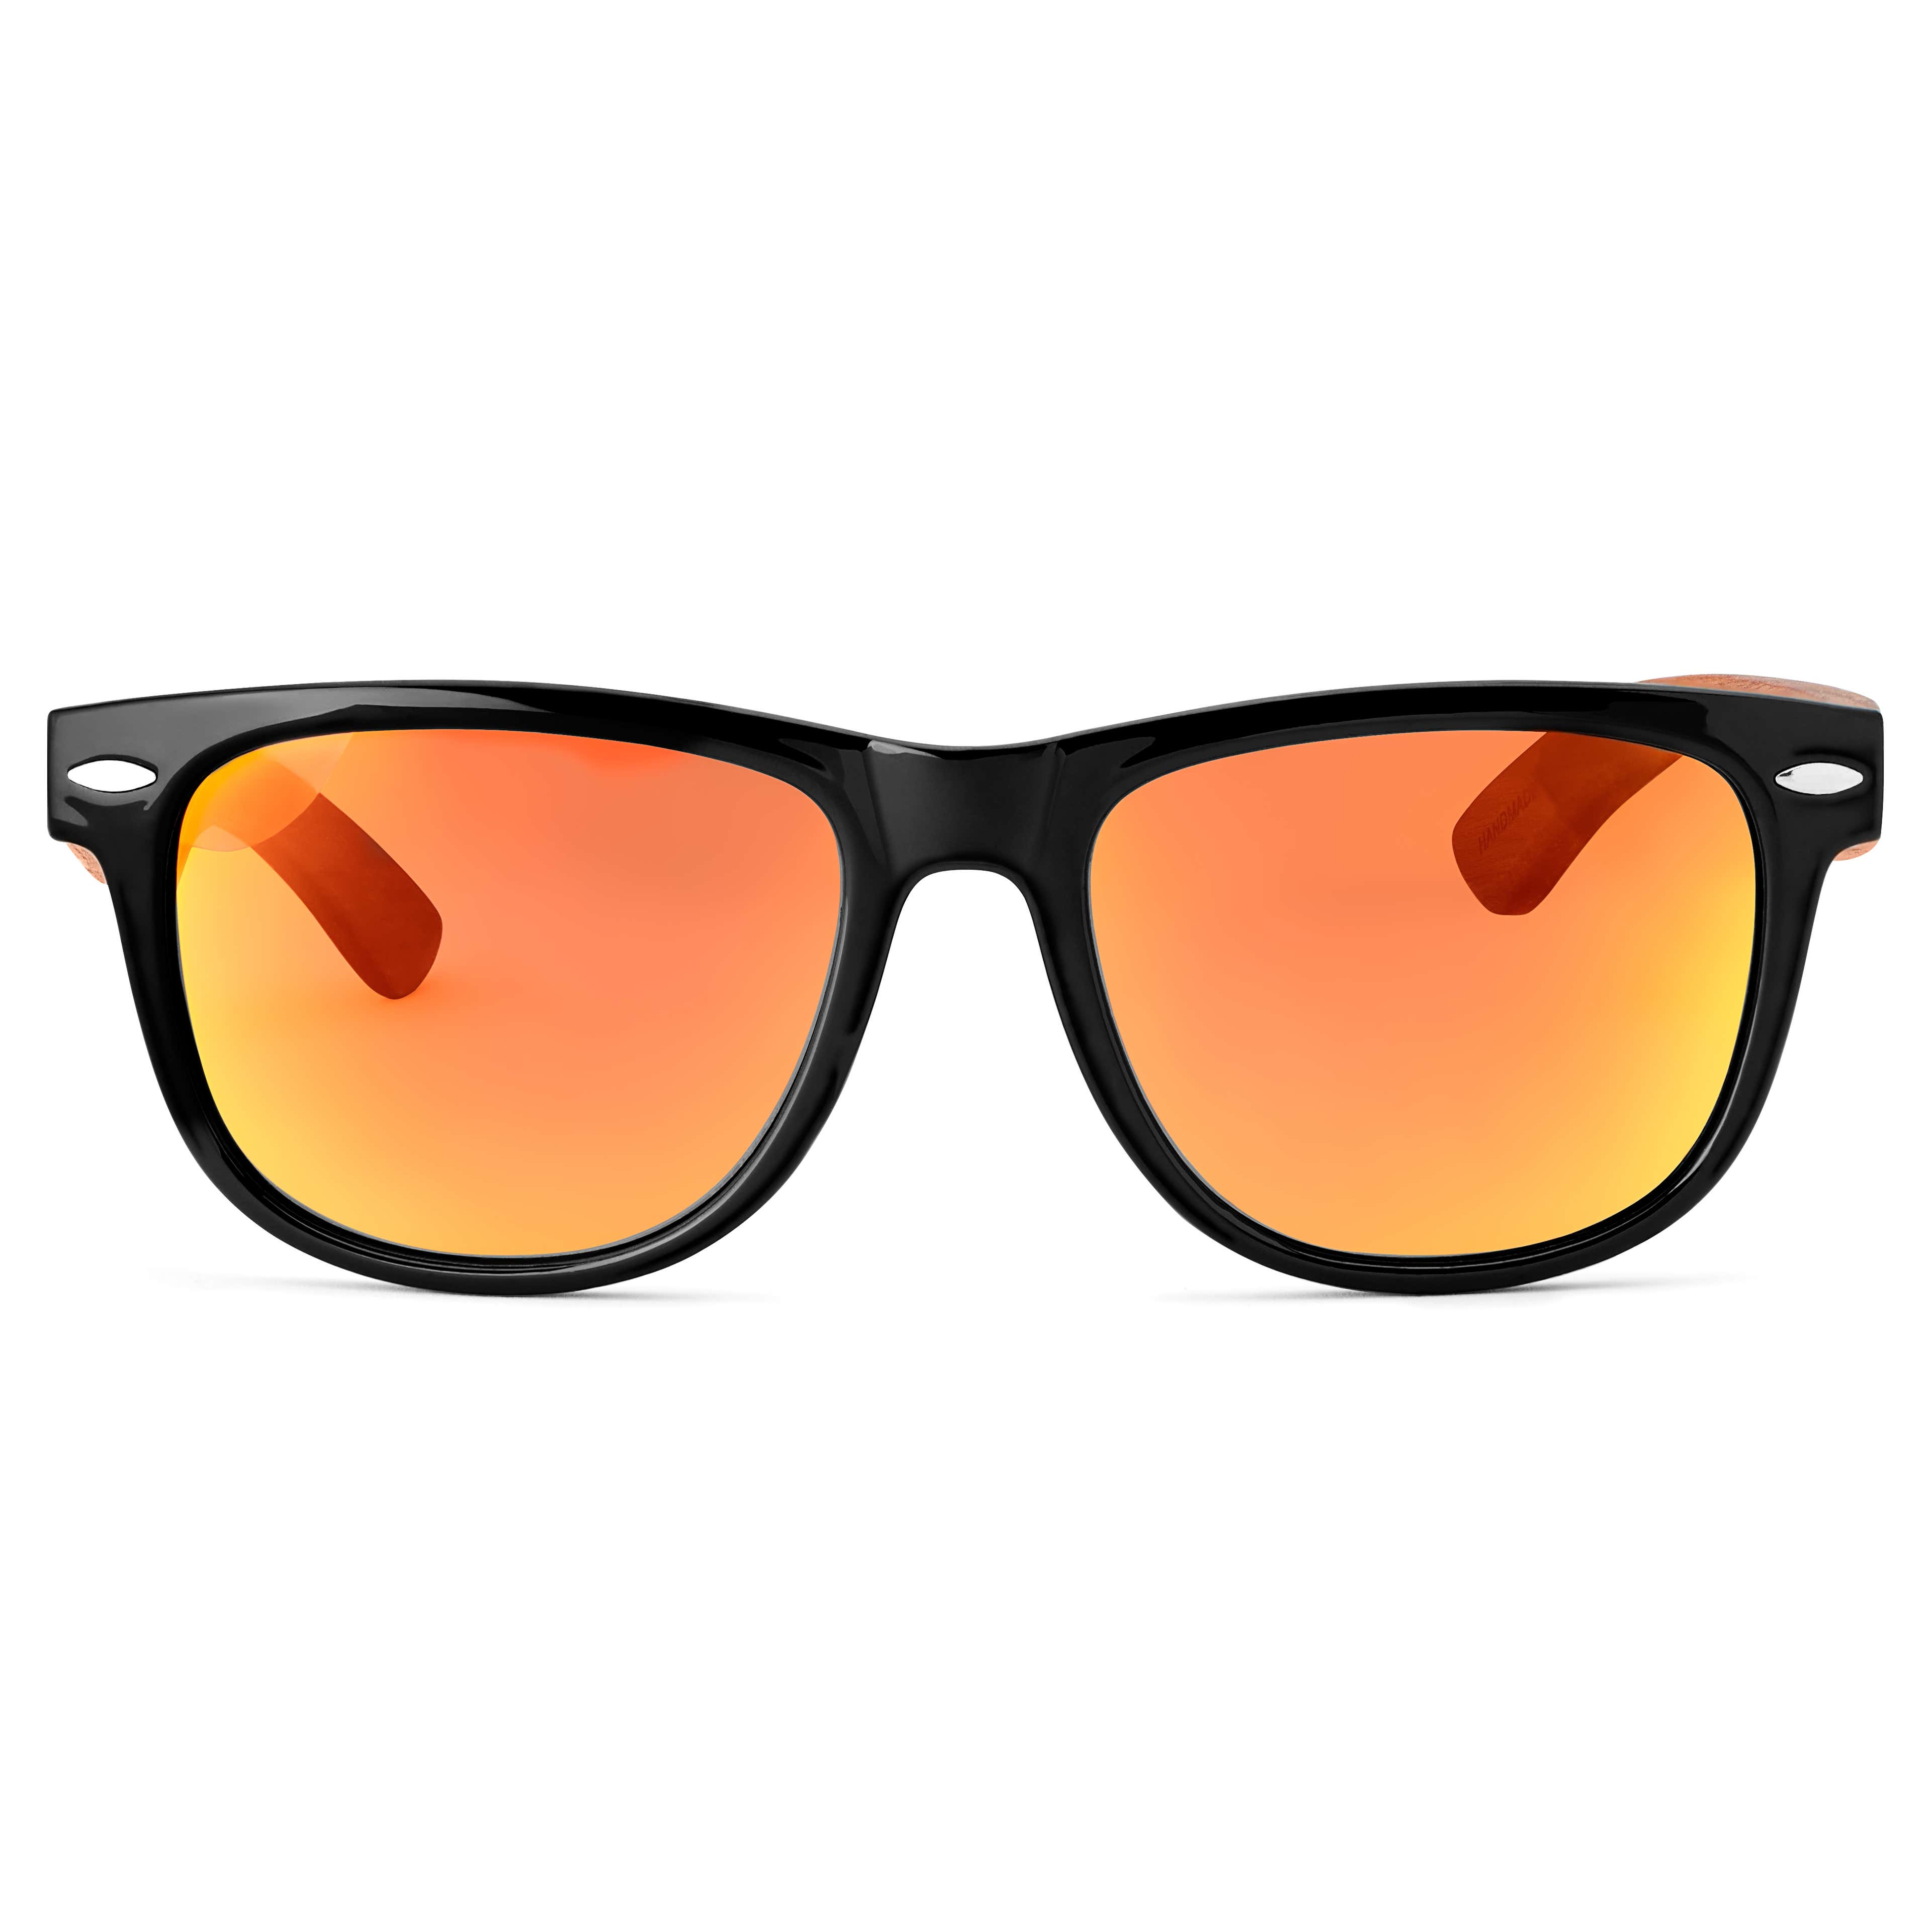 Black & Yellow Retro Polarised Sunglasses With Wood Temples - 5 - gallery